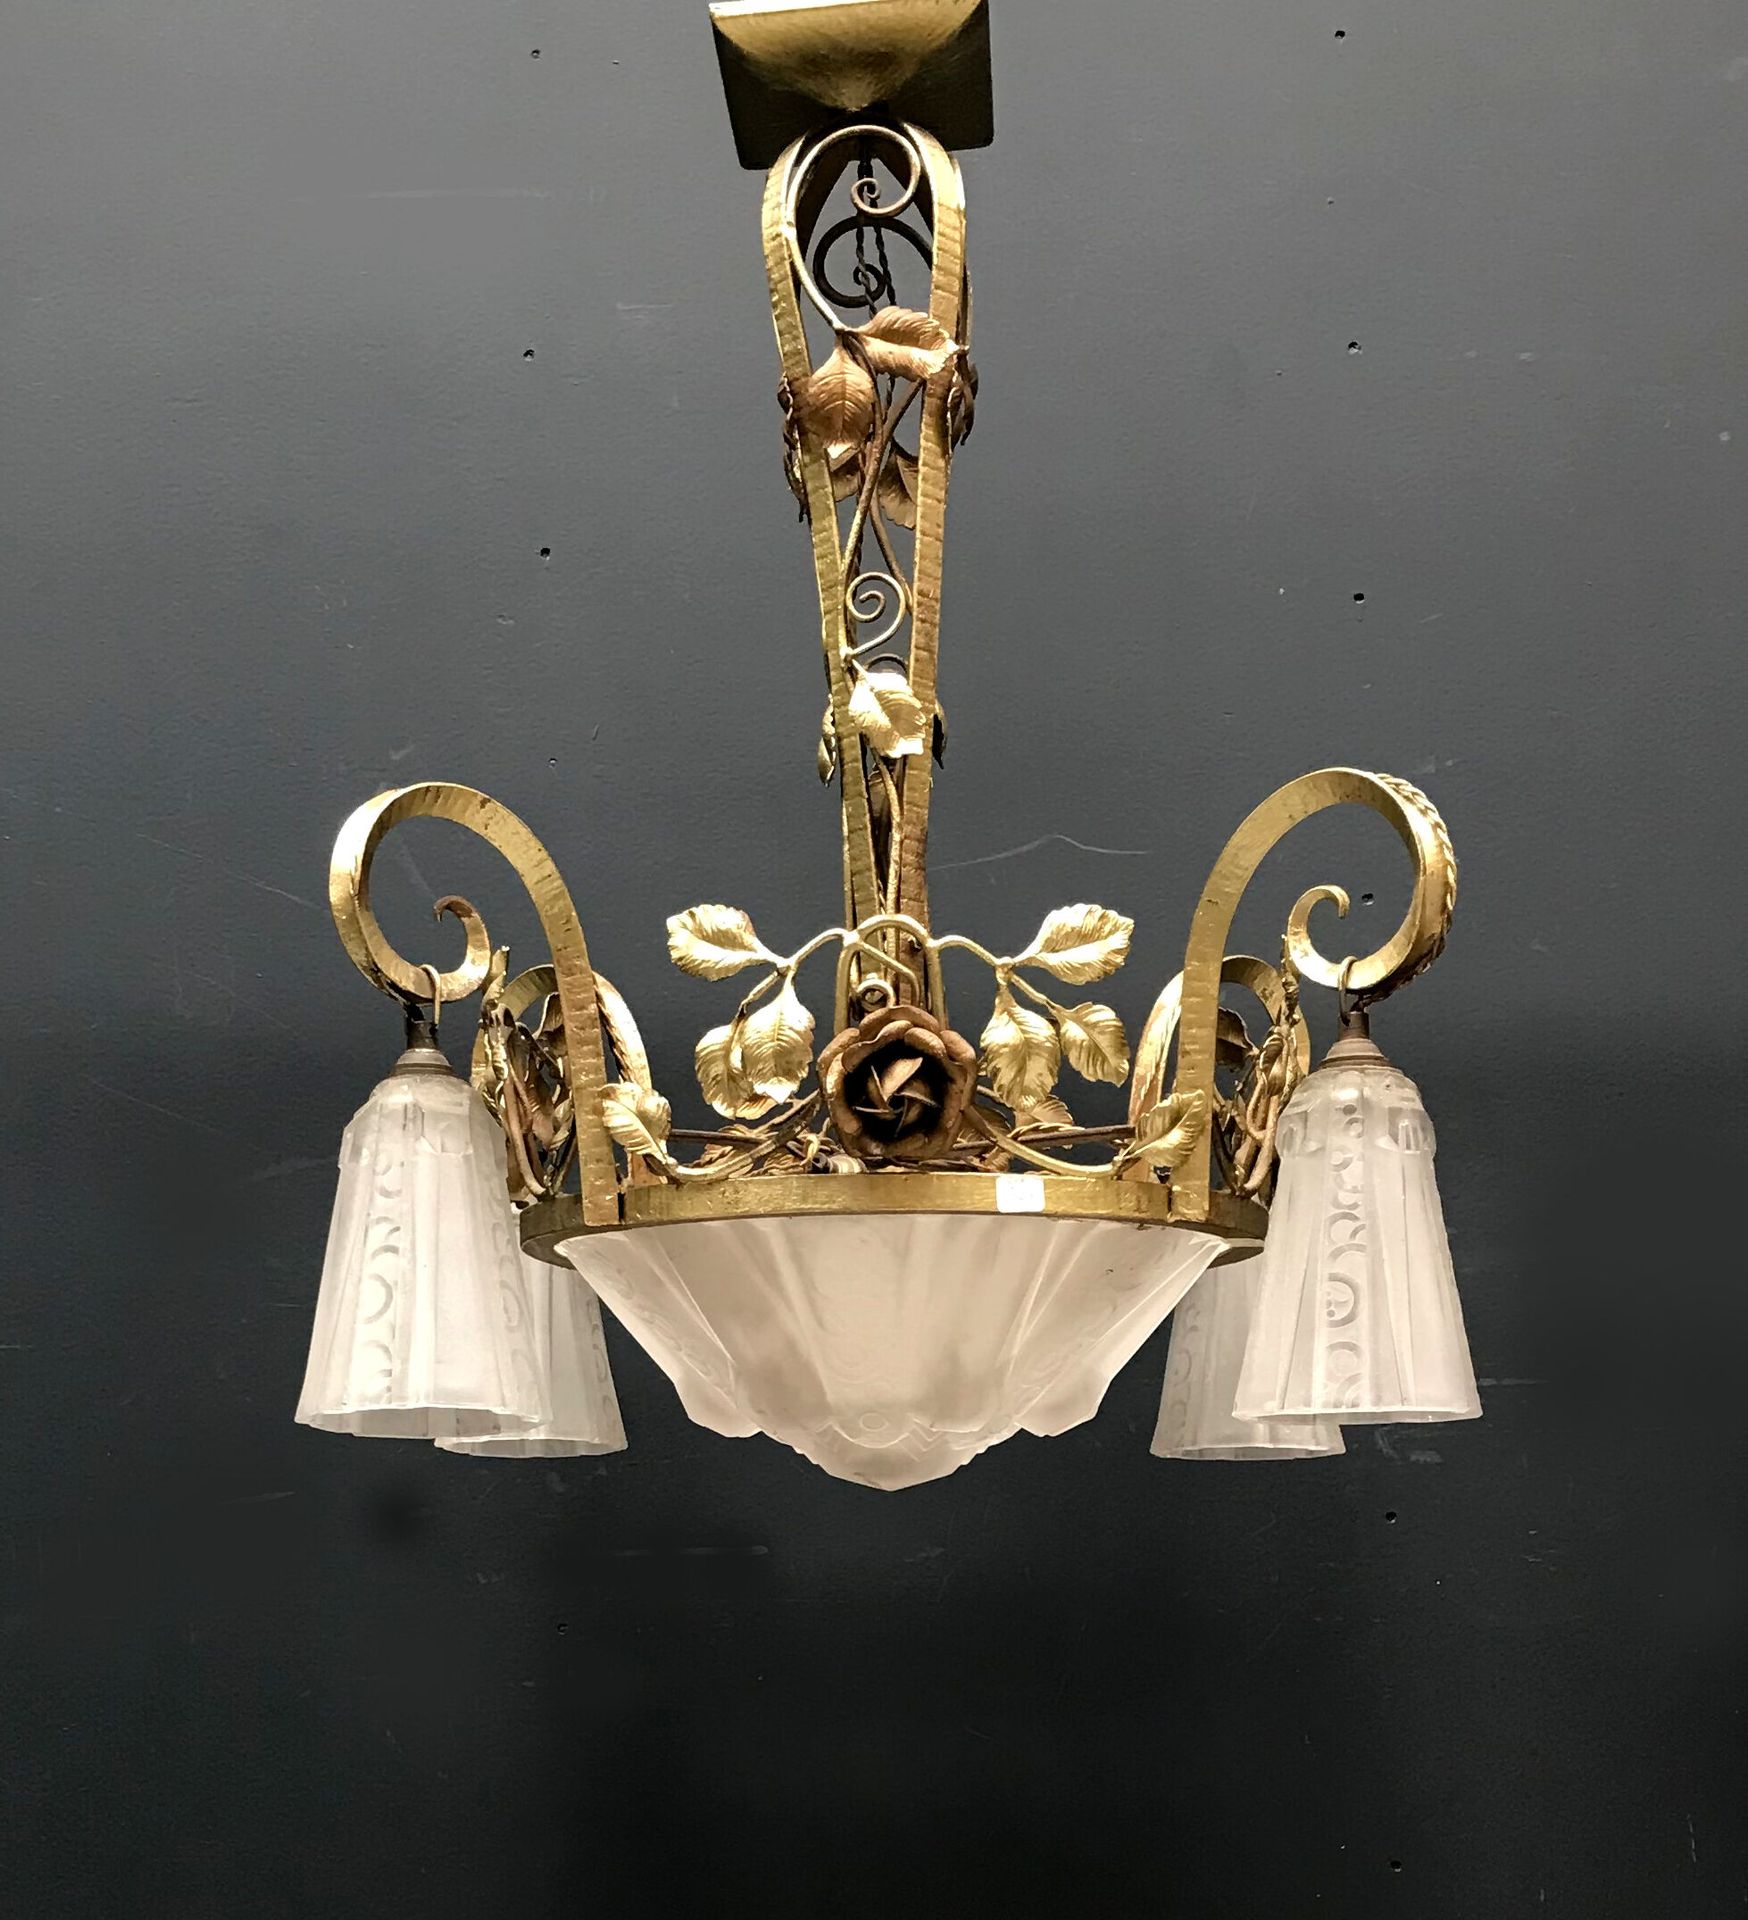 Null MULLER FRERES - Luneville
Chandelier in gilded metal and molded glass with &hellip;